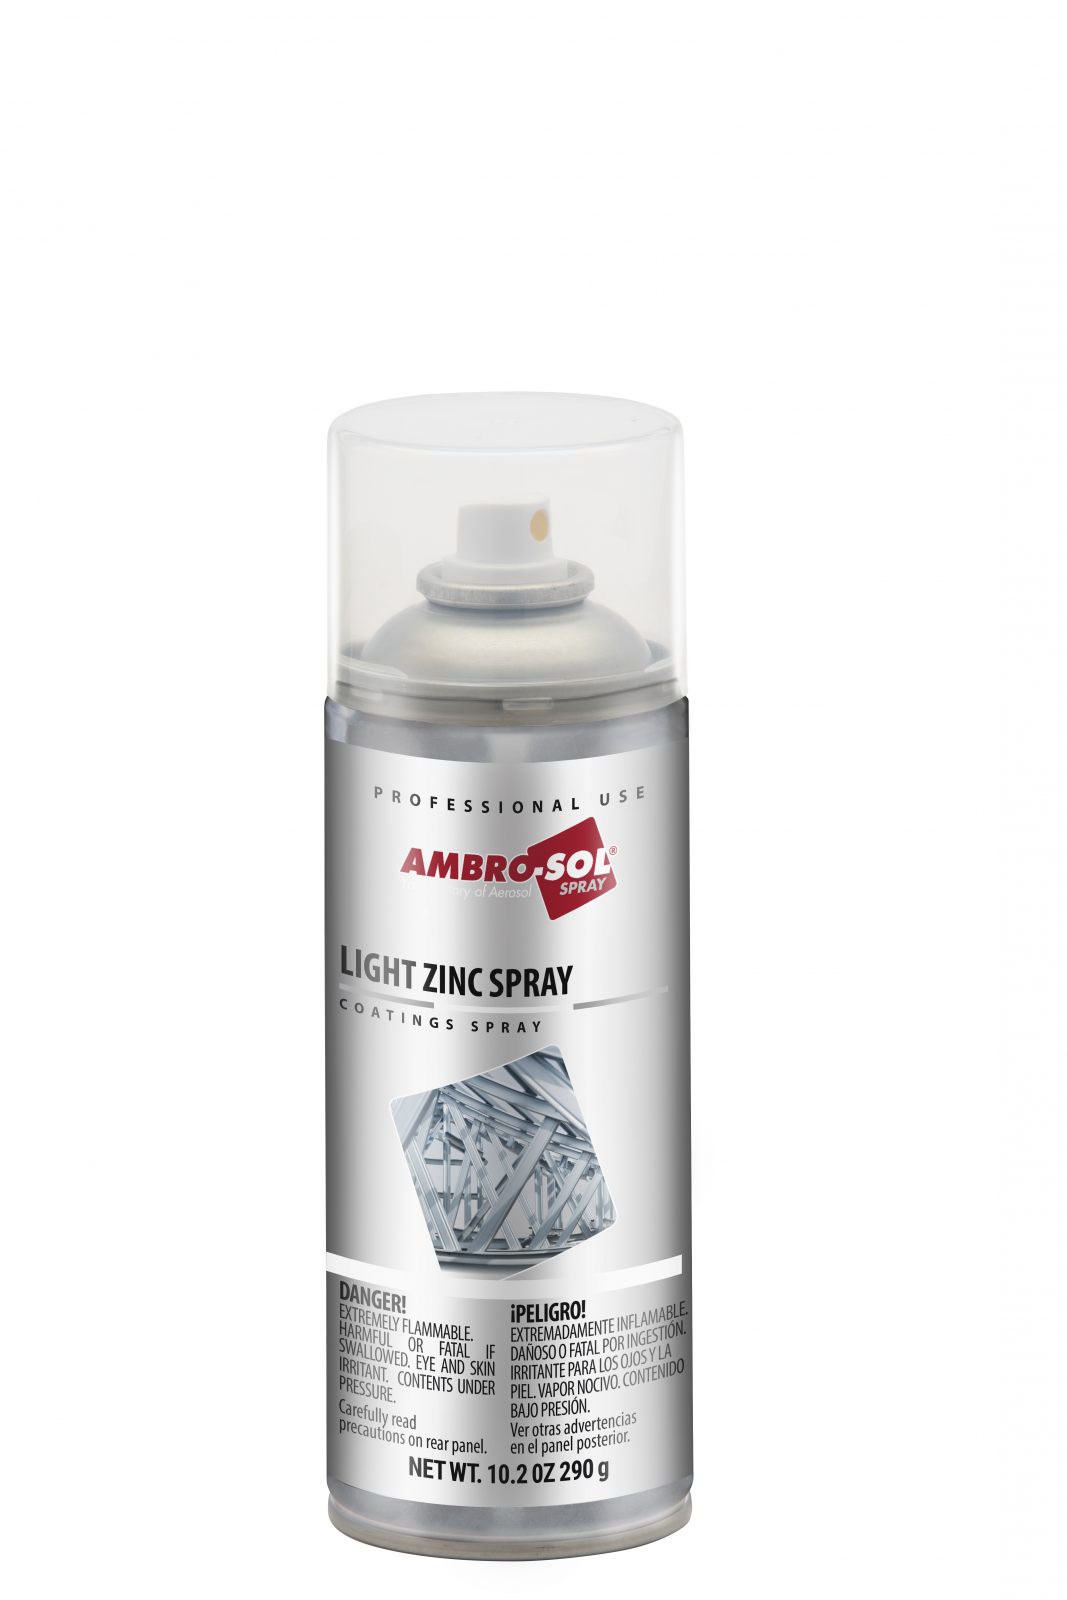 The light zinc spray produces a long-lasting metal coating and protects all metal surfaces from rust. Discover our wide range of products today!